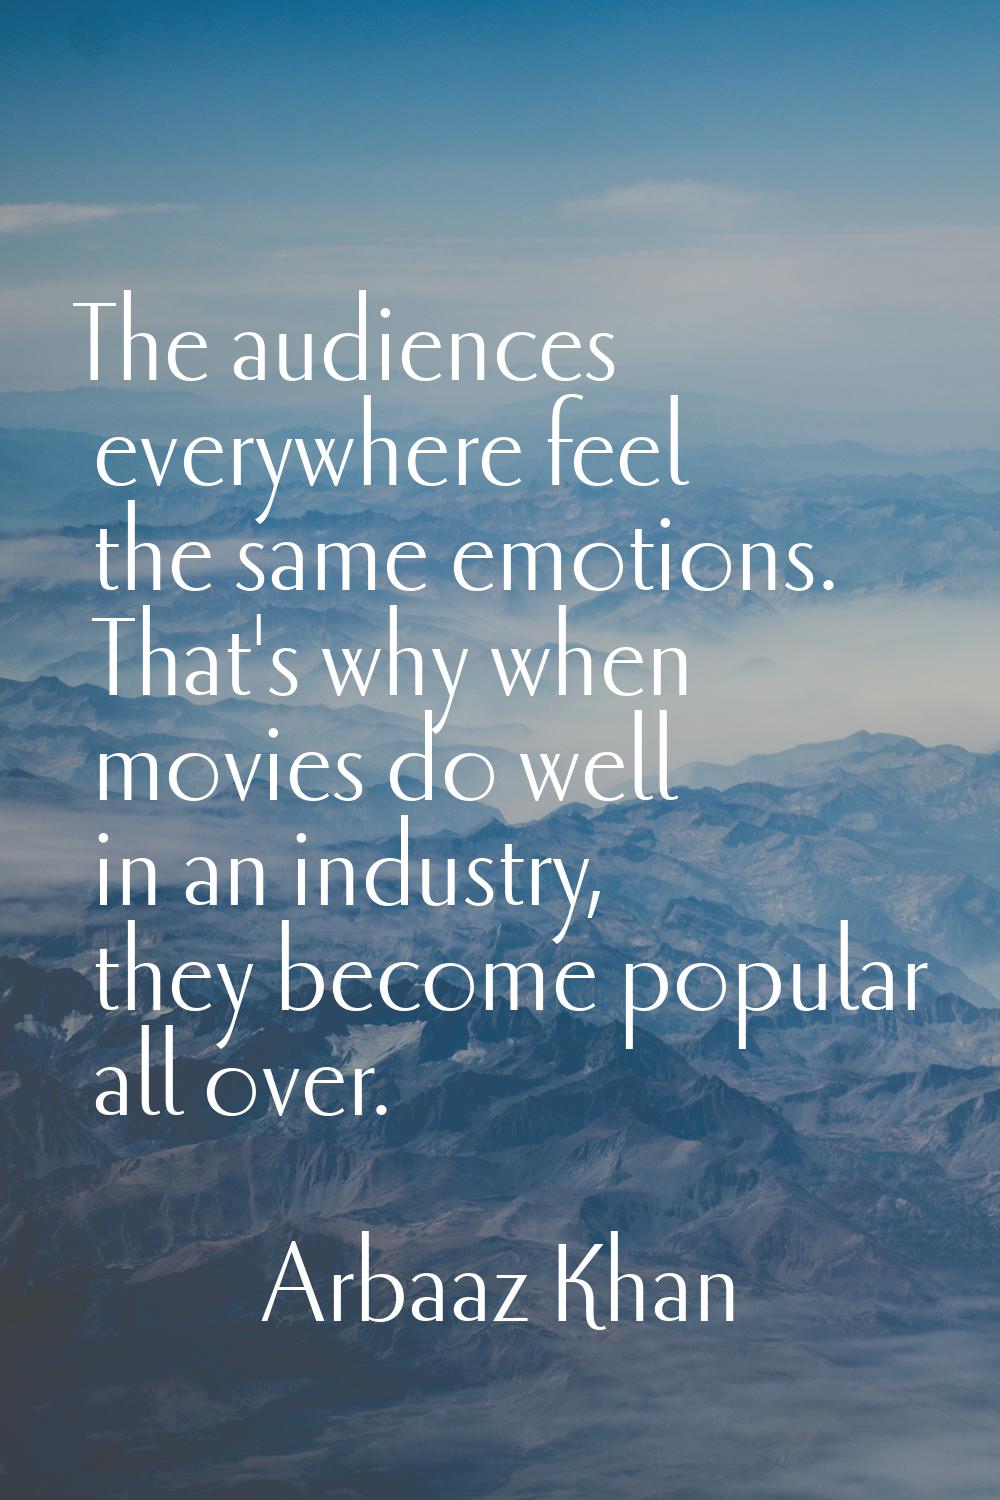 The audiences everywhere feel the same emotions. That's why when movies do well in an industry, the